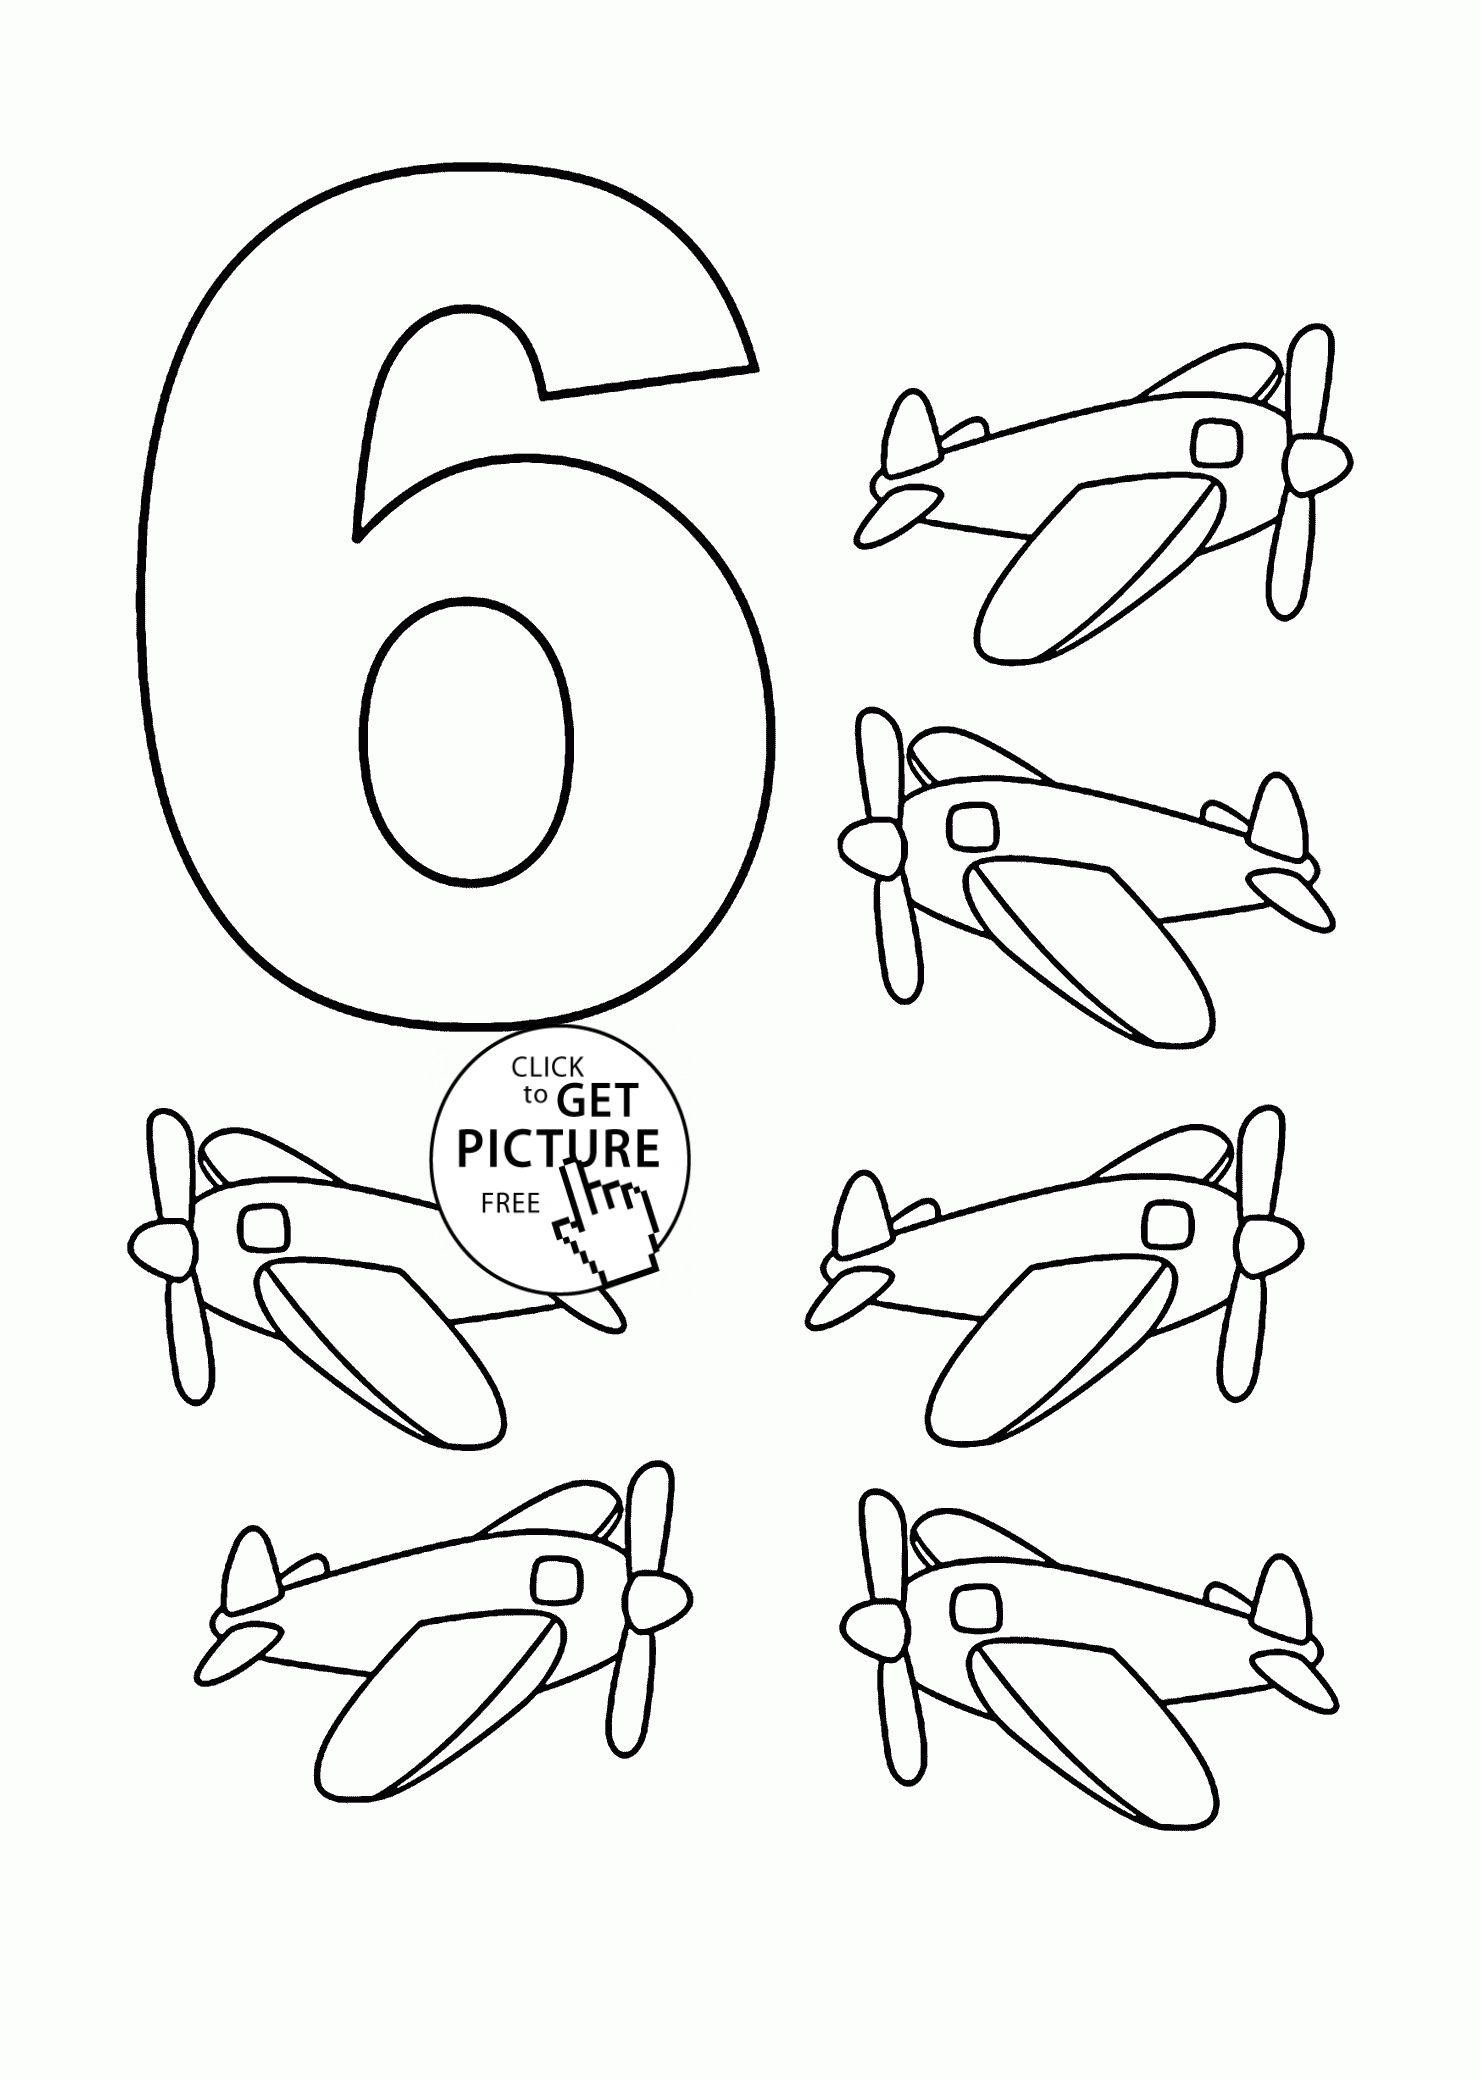 coloring page for 6 number 6 coloring page getcoloringpagescom coloring page for 6 